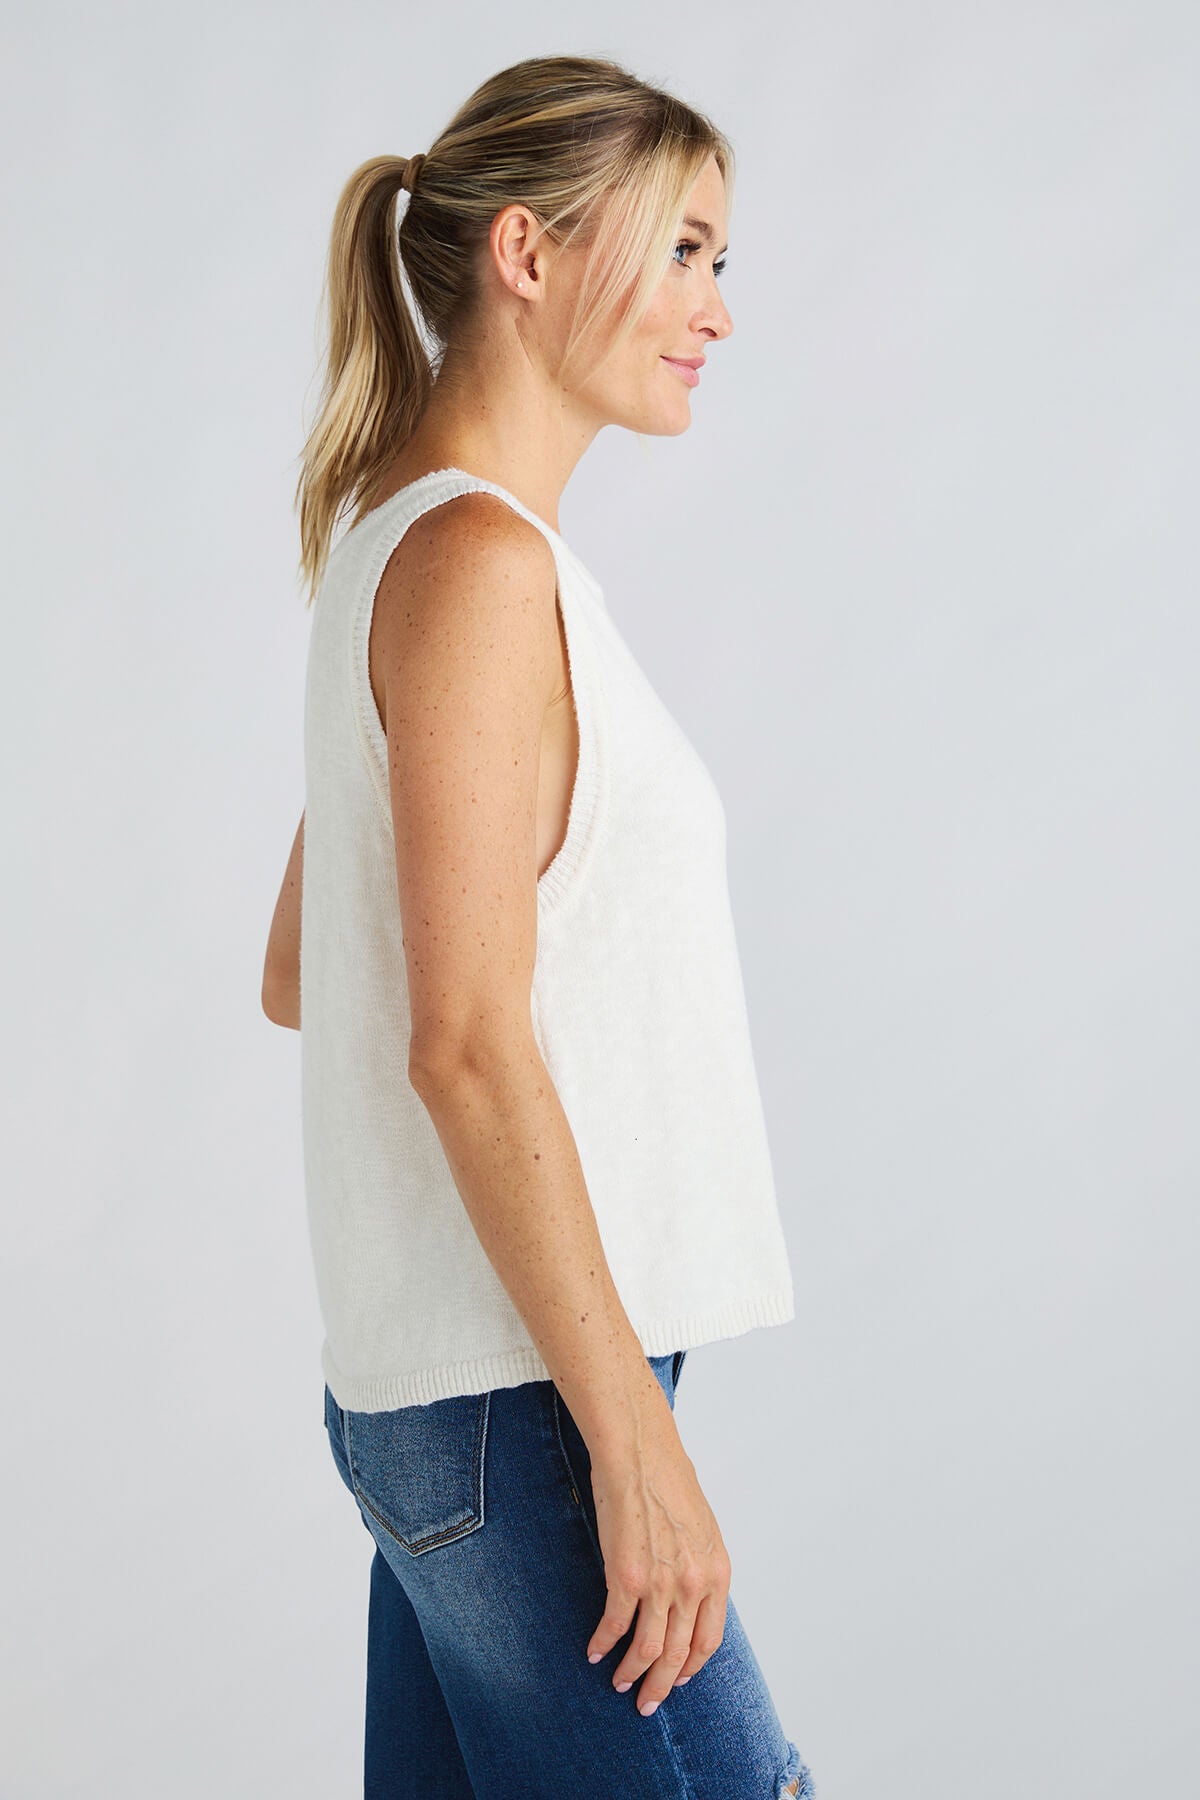 By Together Sleeveless Top